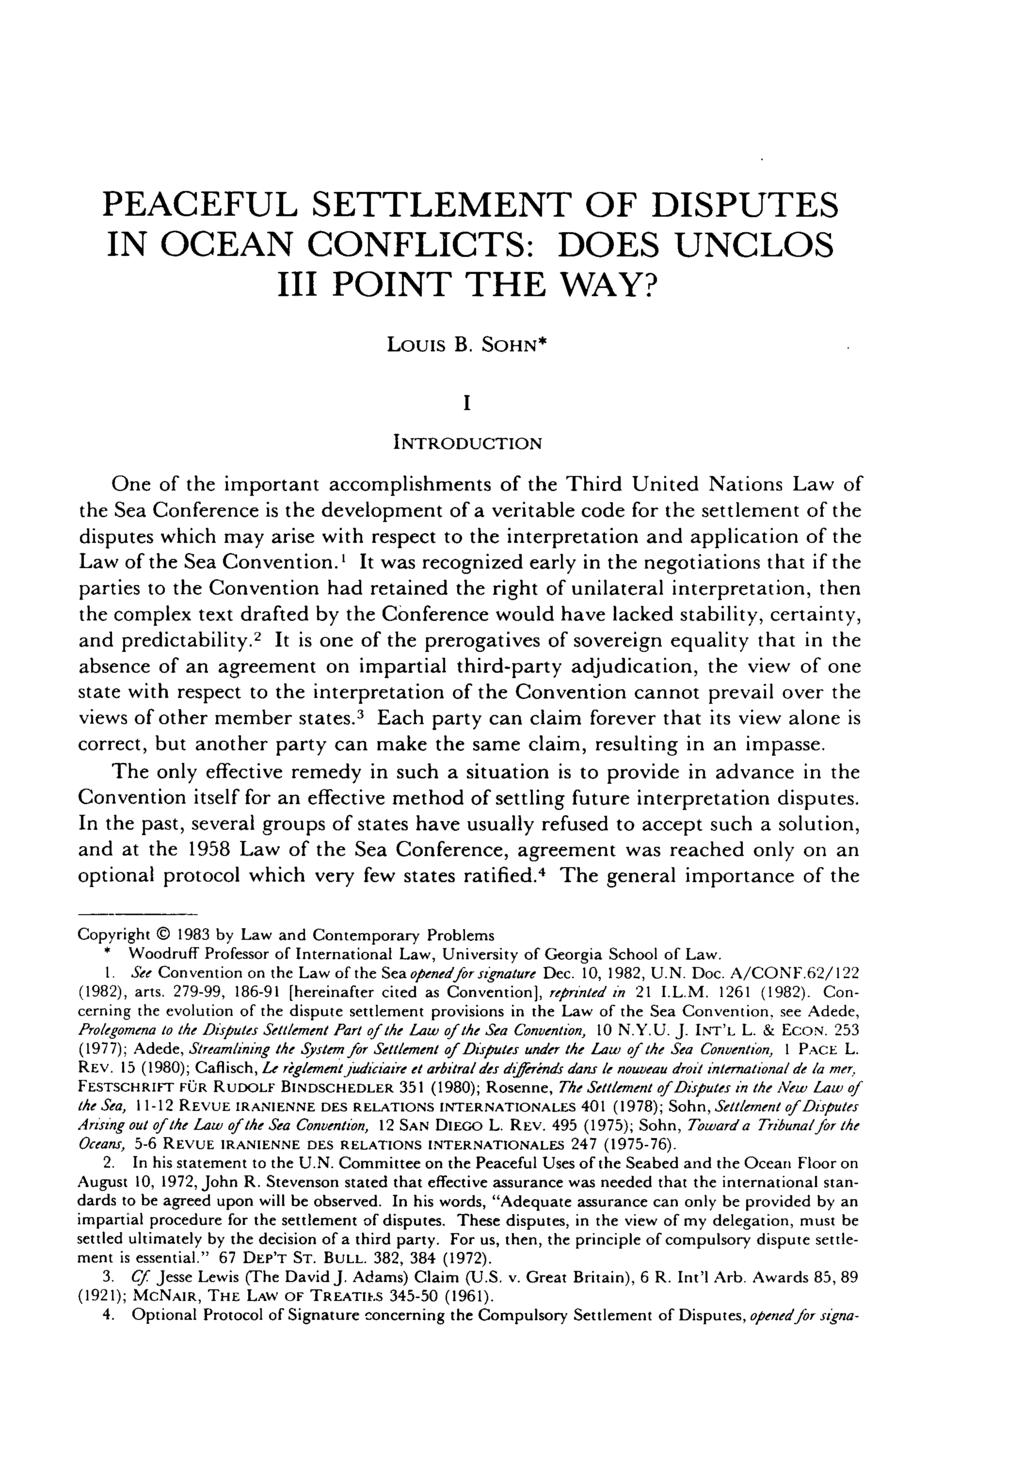 PEACEFUL SETTLEMENT OF DISPUTES IN OCEAN CONFLICTS: DOES UNCLOS III POINT THE WAY? Louis B.